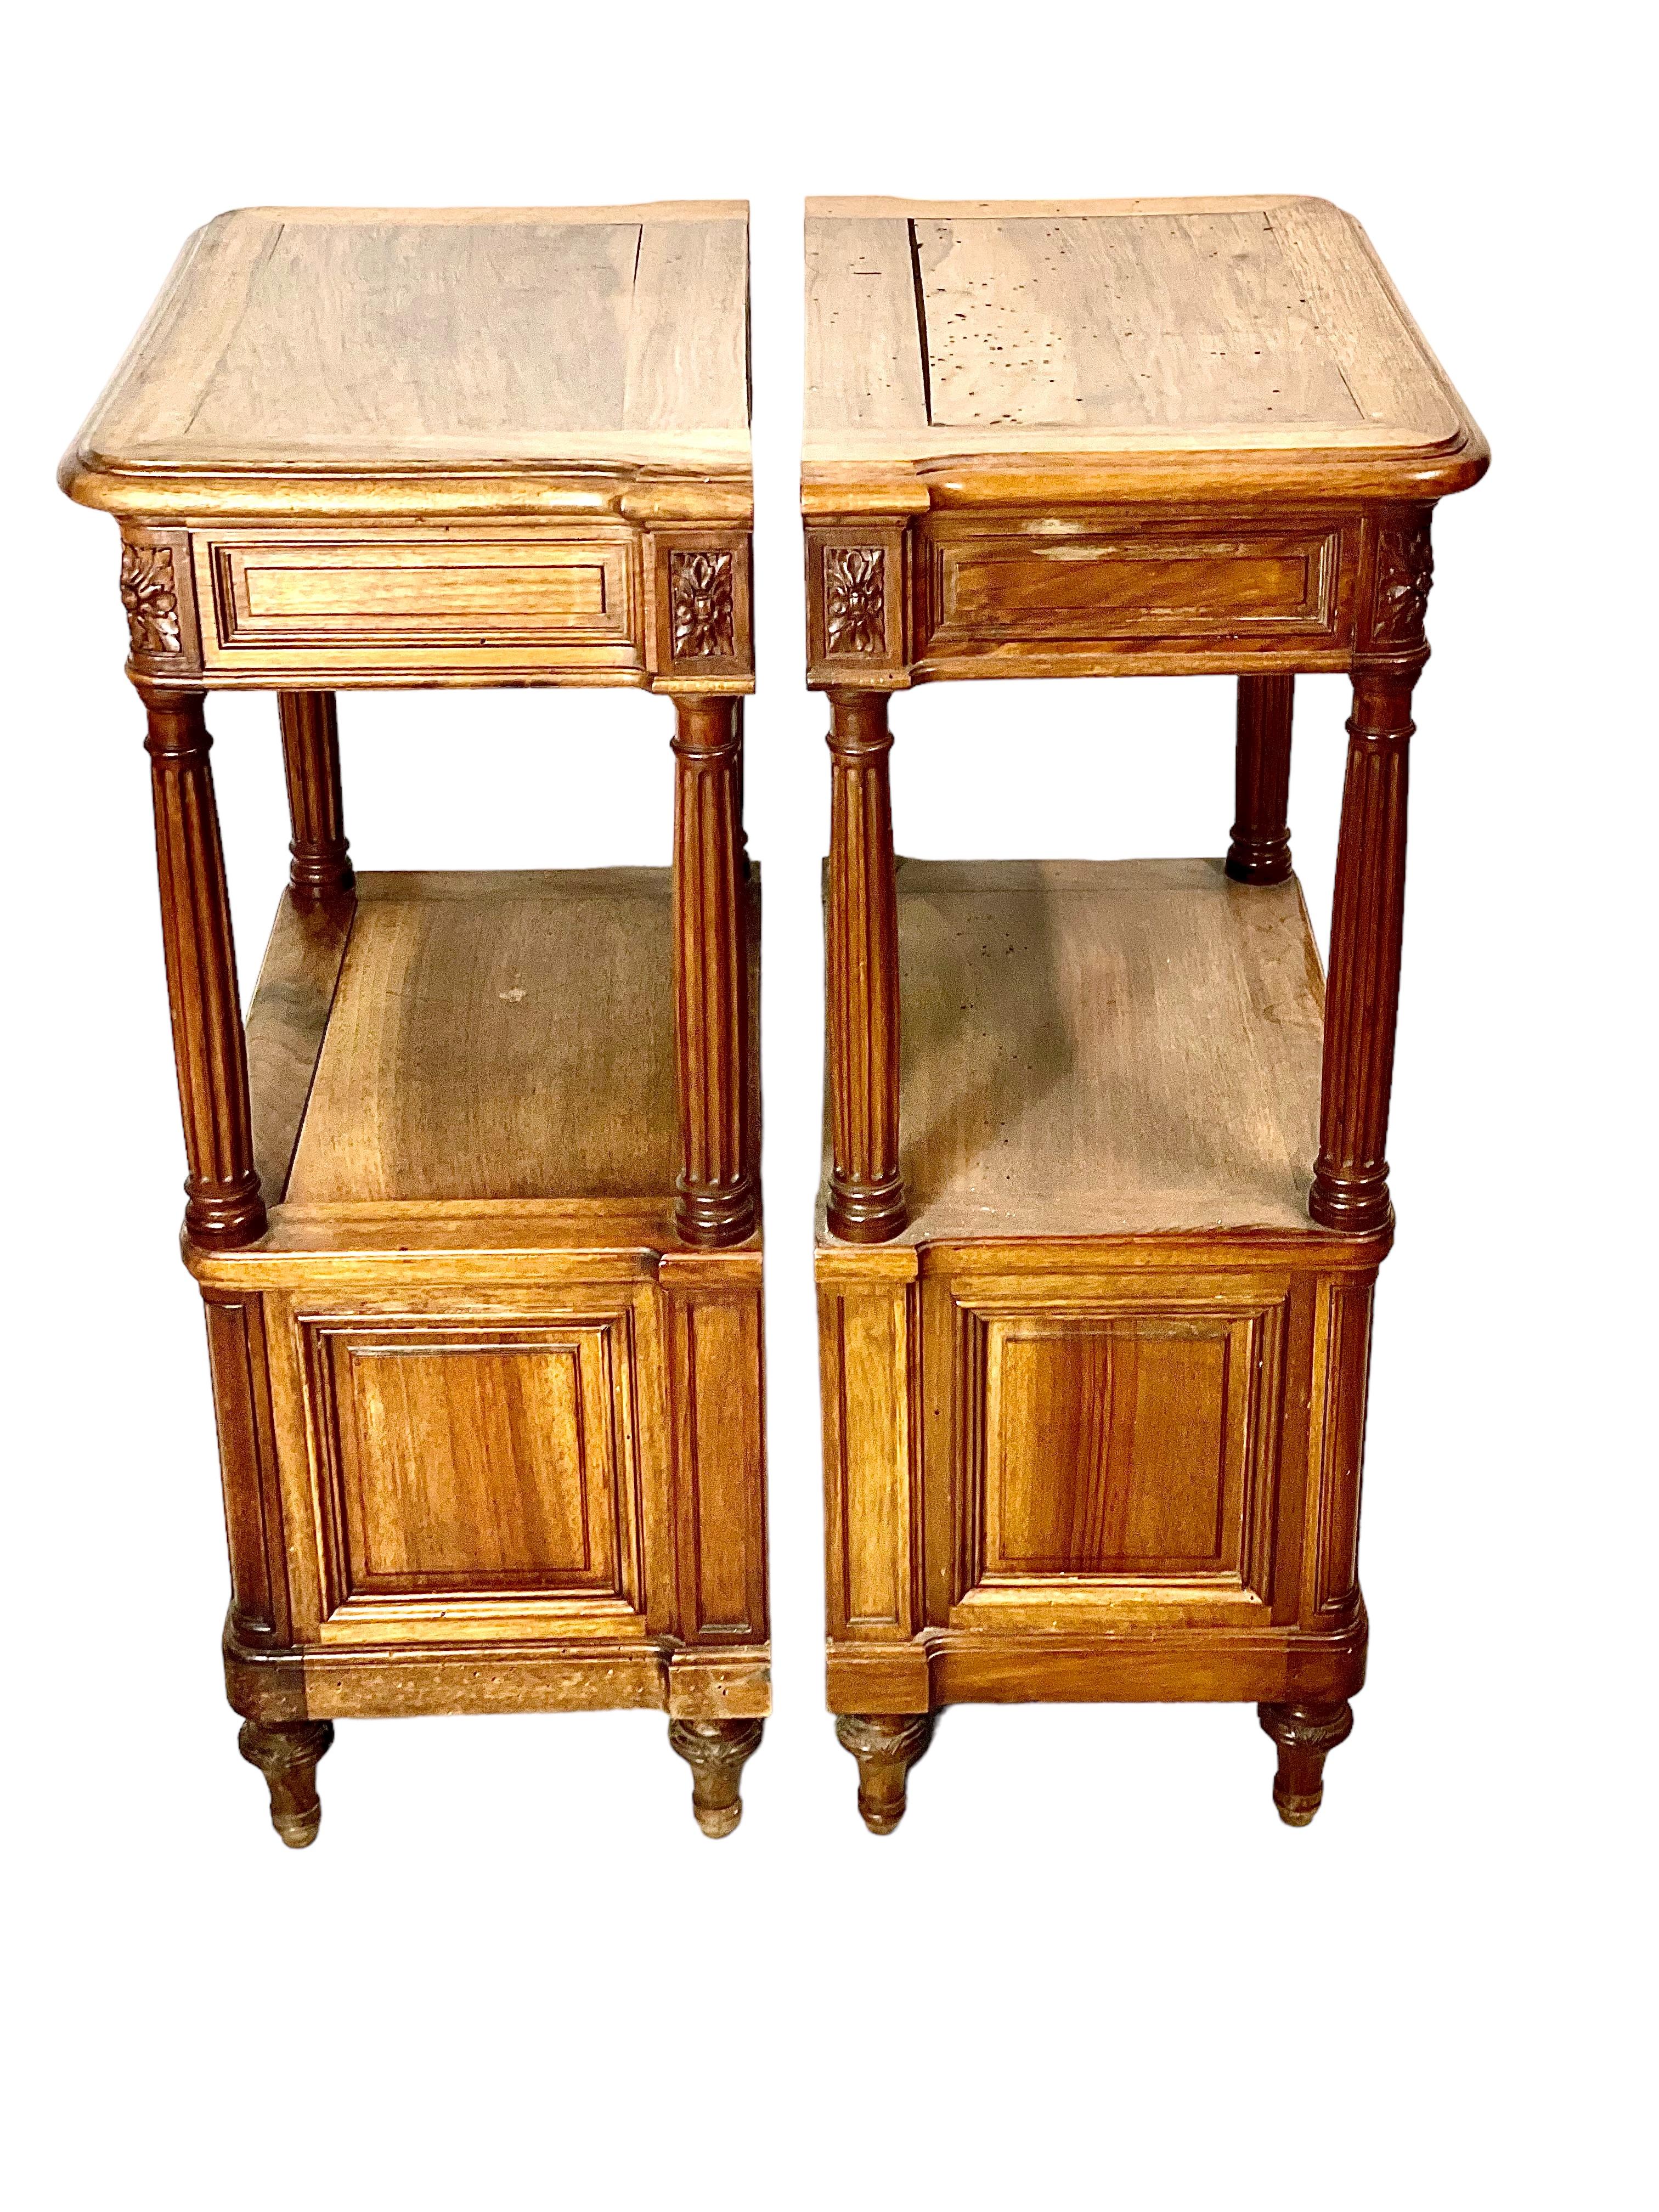 A superb matching pair of moulded and sculpted wood bedside cabinets. Each has a shaped and polished top, with a slim and intricately decorated trinket drawer below. Fluted supports reach down to a lower storage compartment, the door of which is